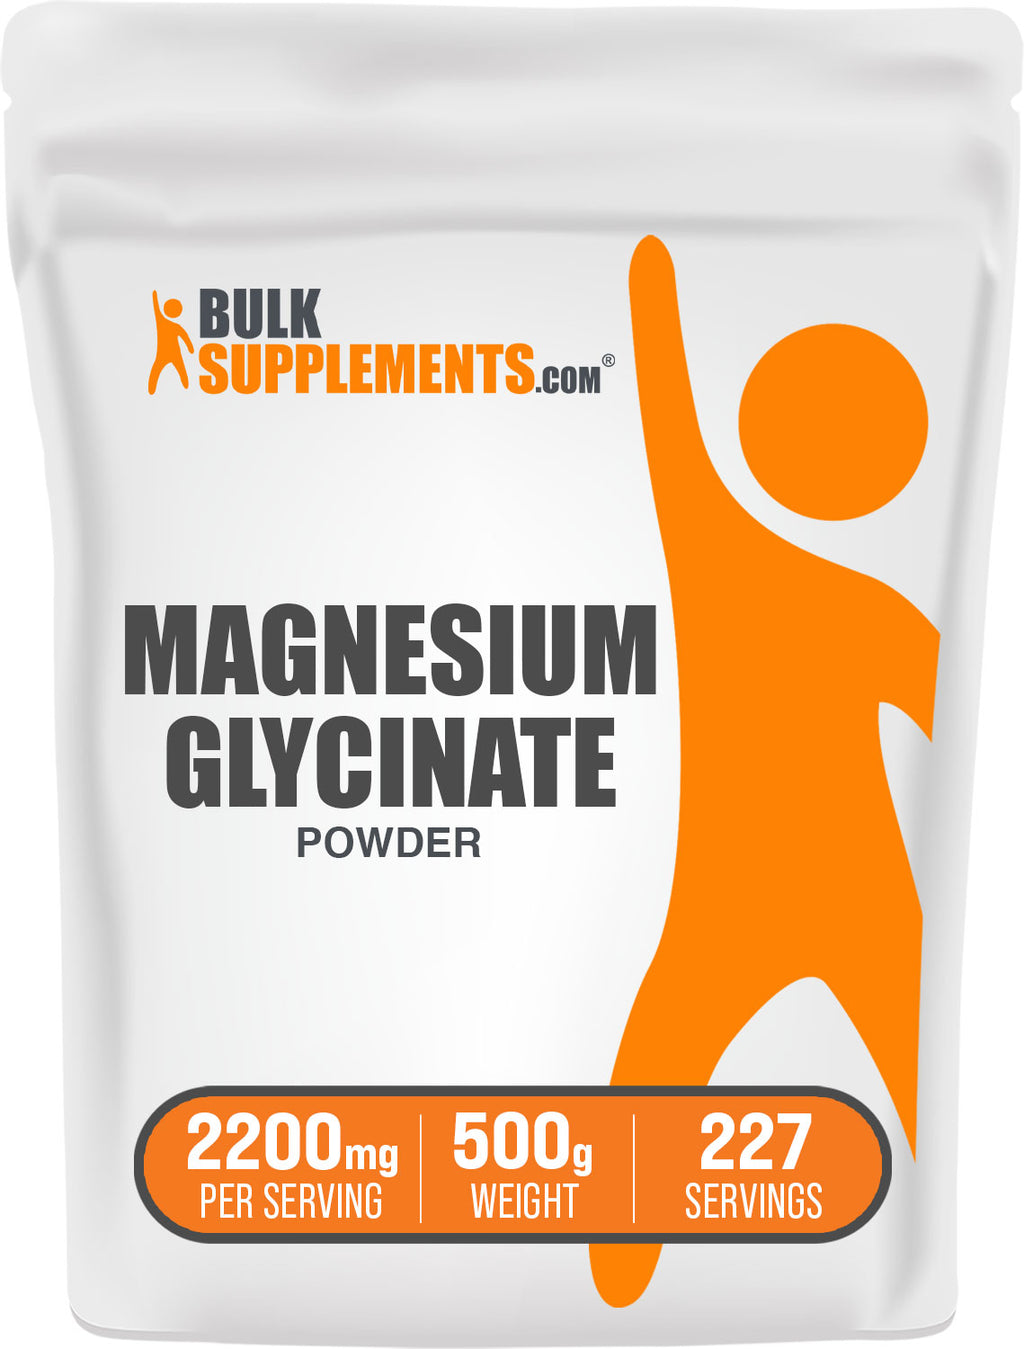  Magnesium Glycinate Supplement, Advanced Microbeadlets, Chelated for Maximum Absorption, 400mg Magnesium Bisglycinate Powder Per  Serving, TRAACS Chelate System, for Women & Men